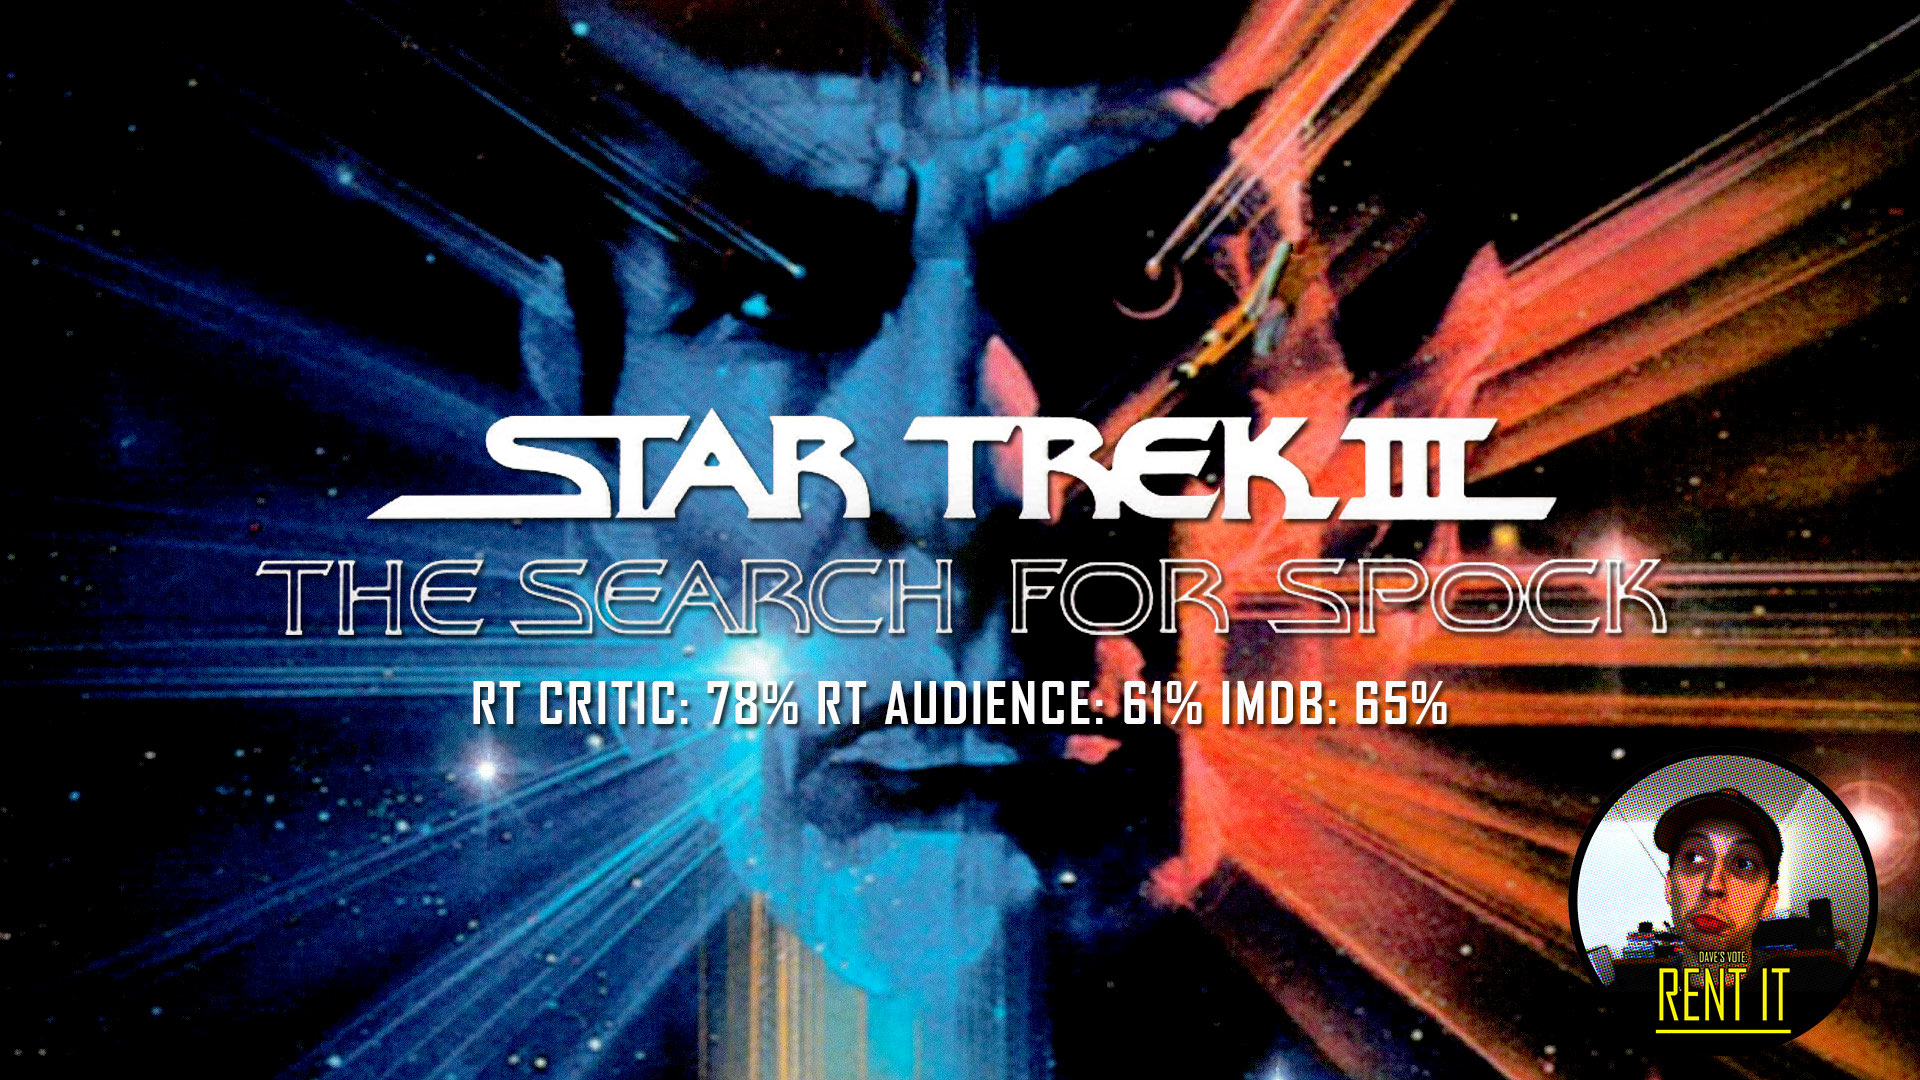 Star Trek III: The Search For Spock #23